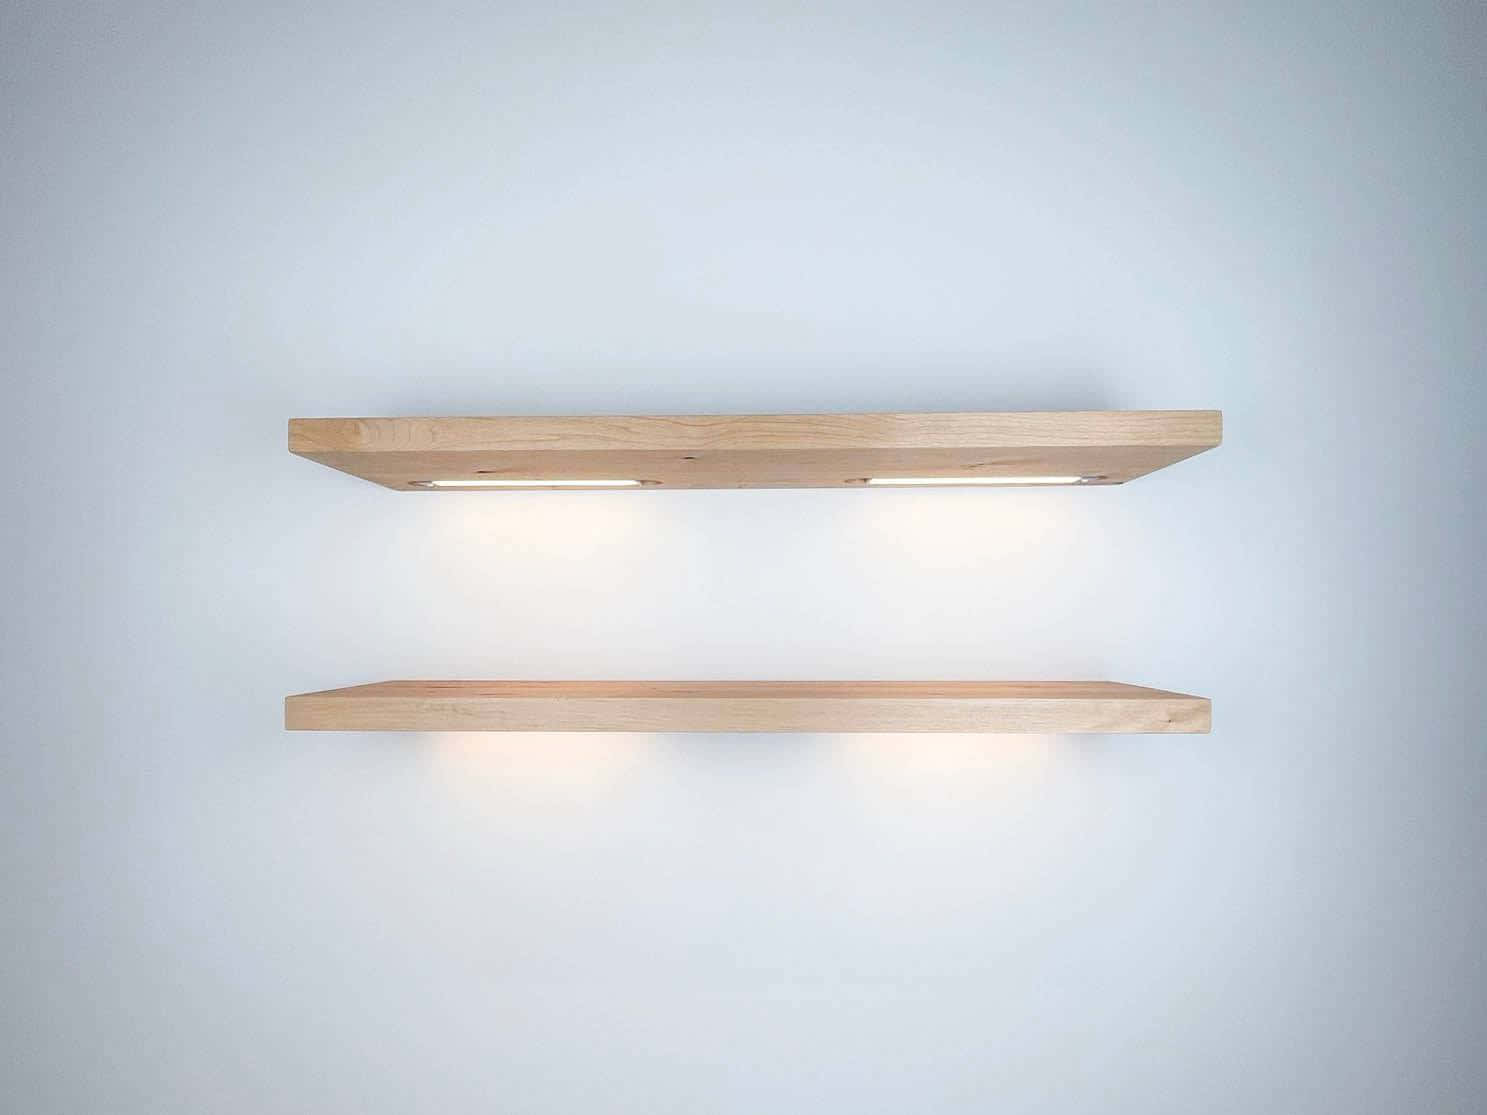 Two Wooden Shelves With Lights On Them